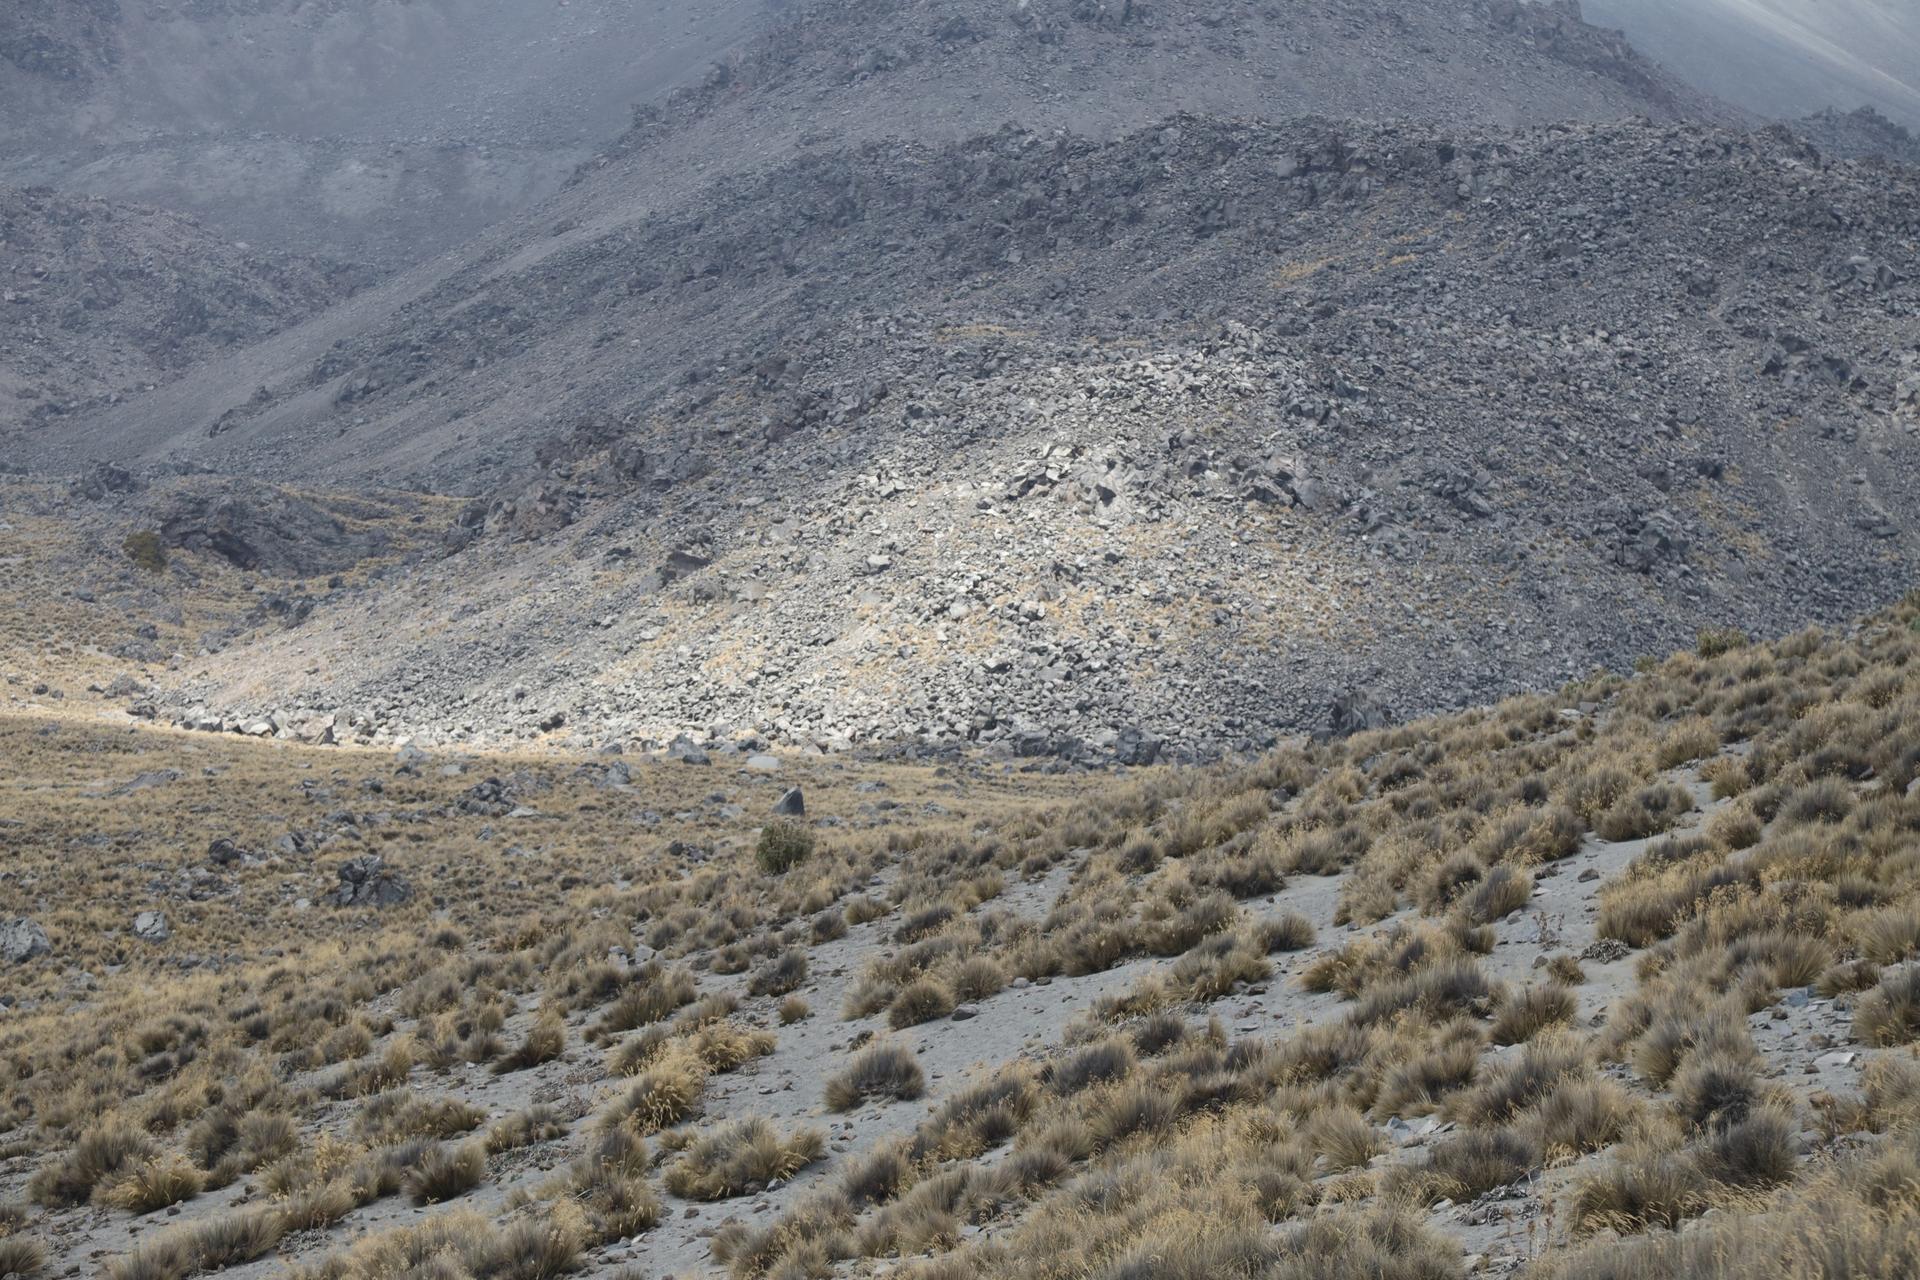 Side of the Orizaba Peak mountain where the shrub tundra vegetation gives way to the landscape of grey rocks that once laid beneath packs of snow and ice, Mexico